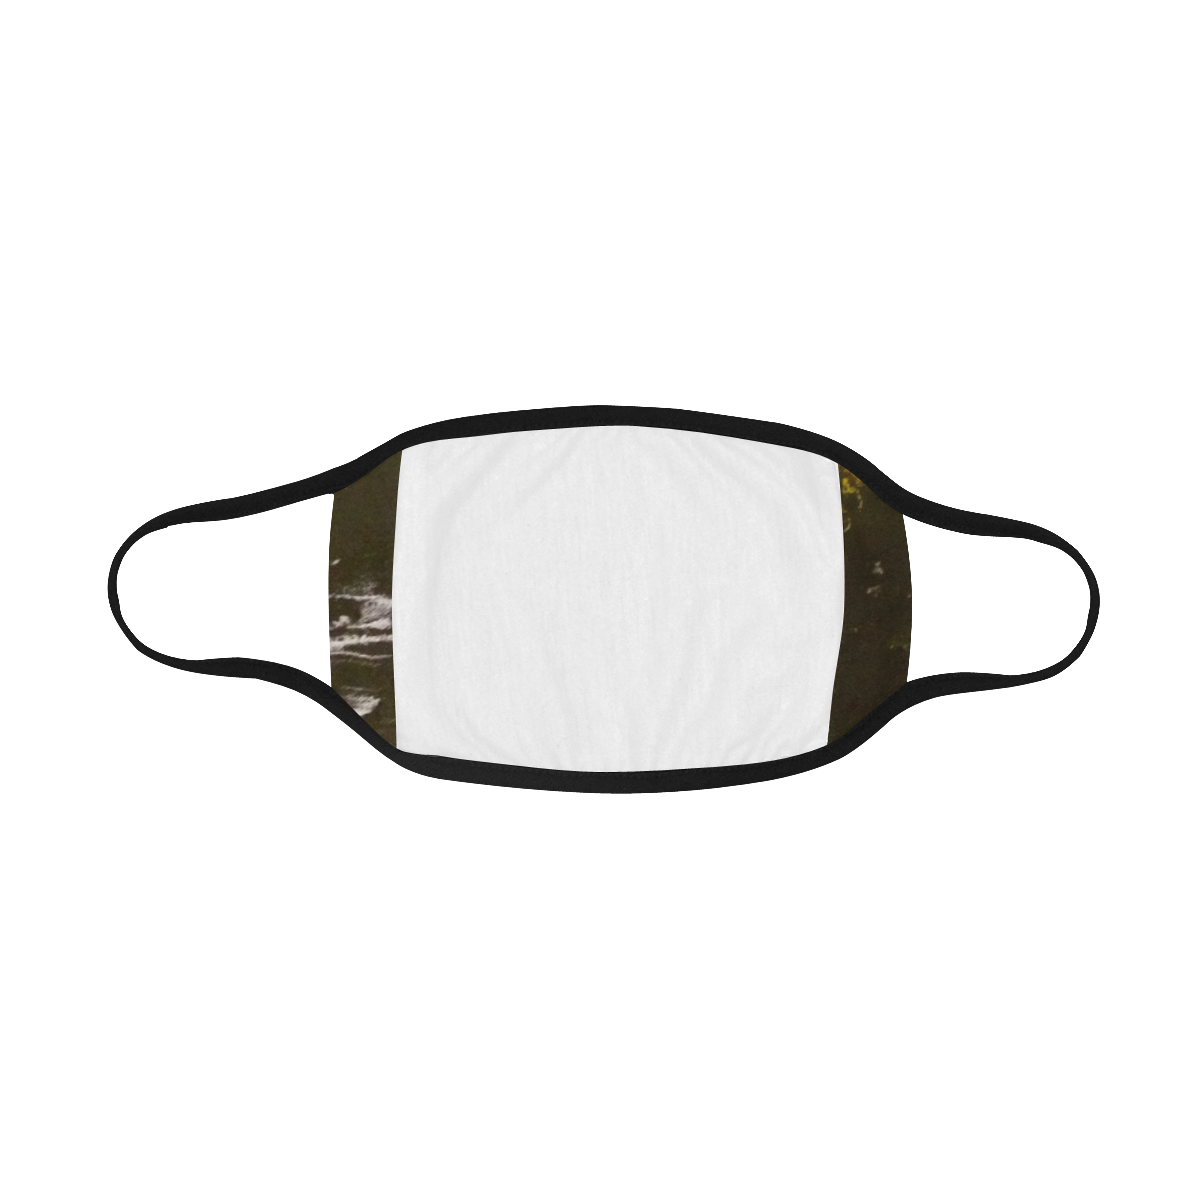 Gold and Black Face Mask Mouth Mask (2 Filters Included) (Non-medical Products)